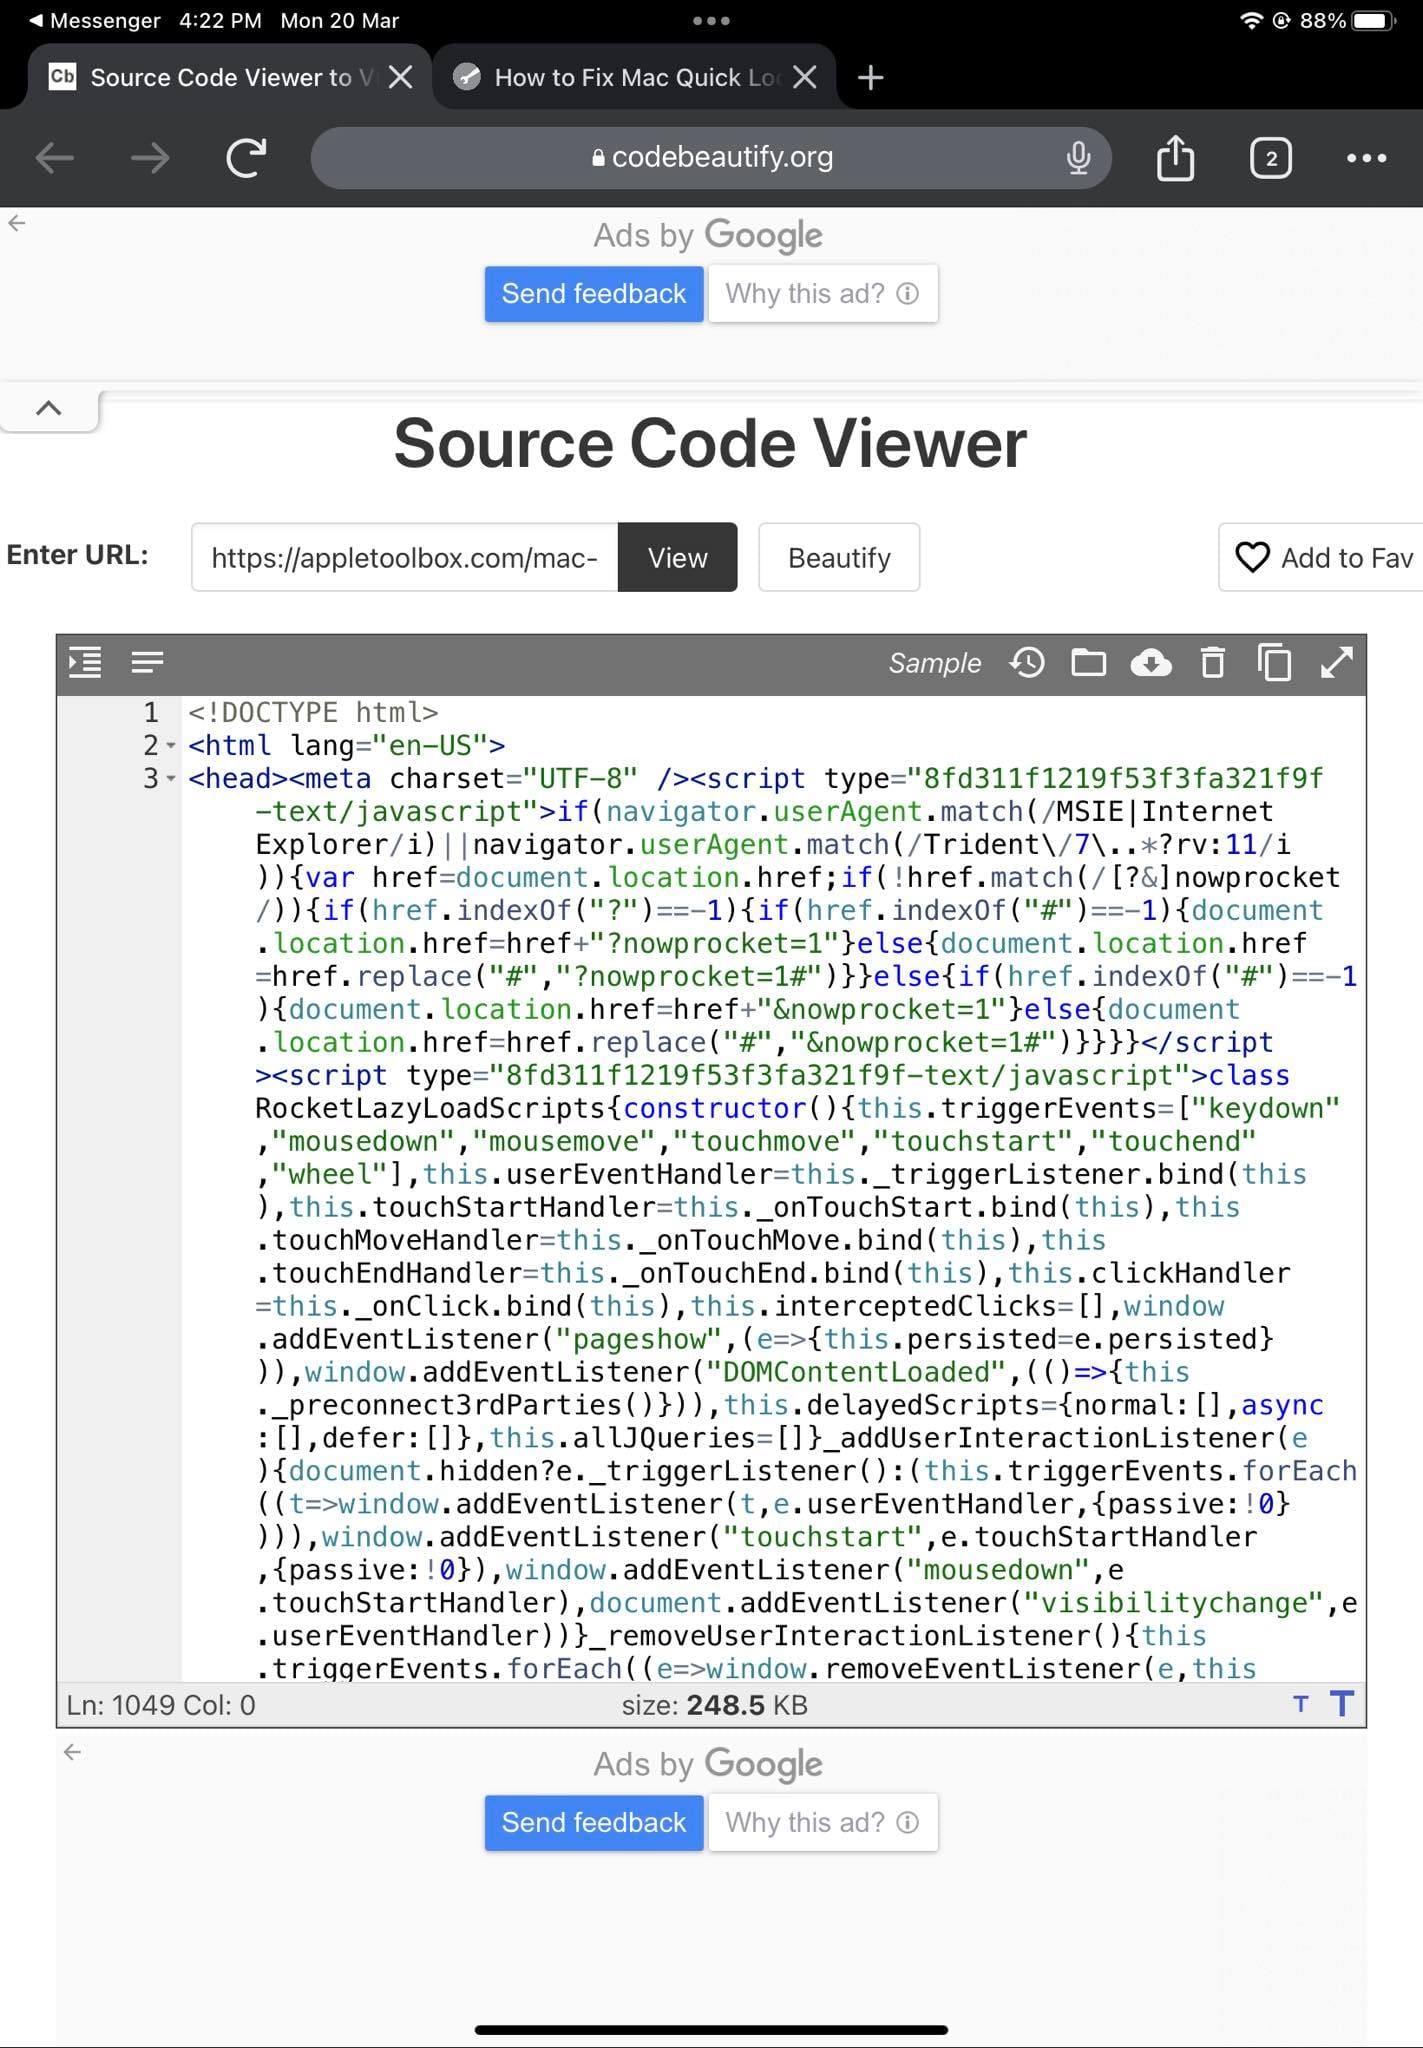 How to View Source Code on Web Apps